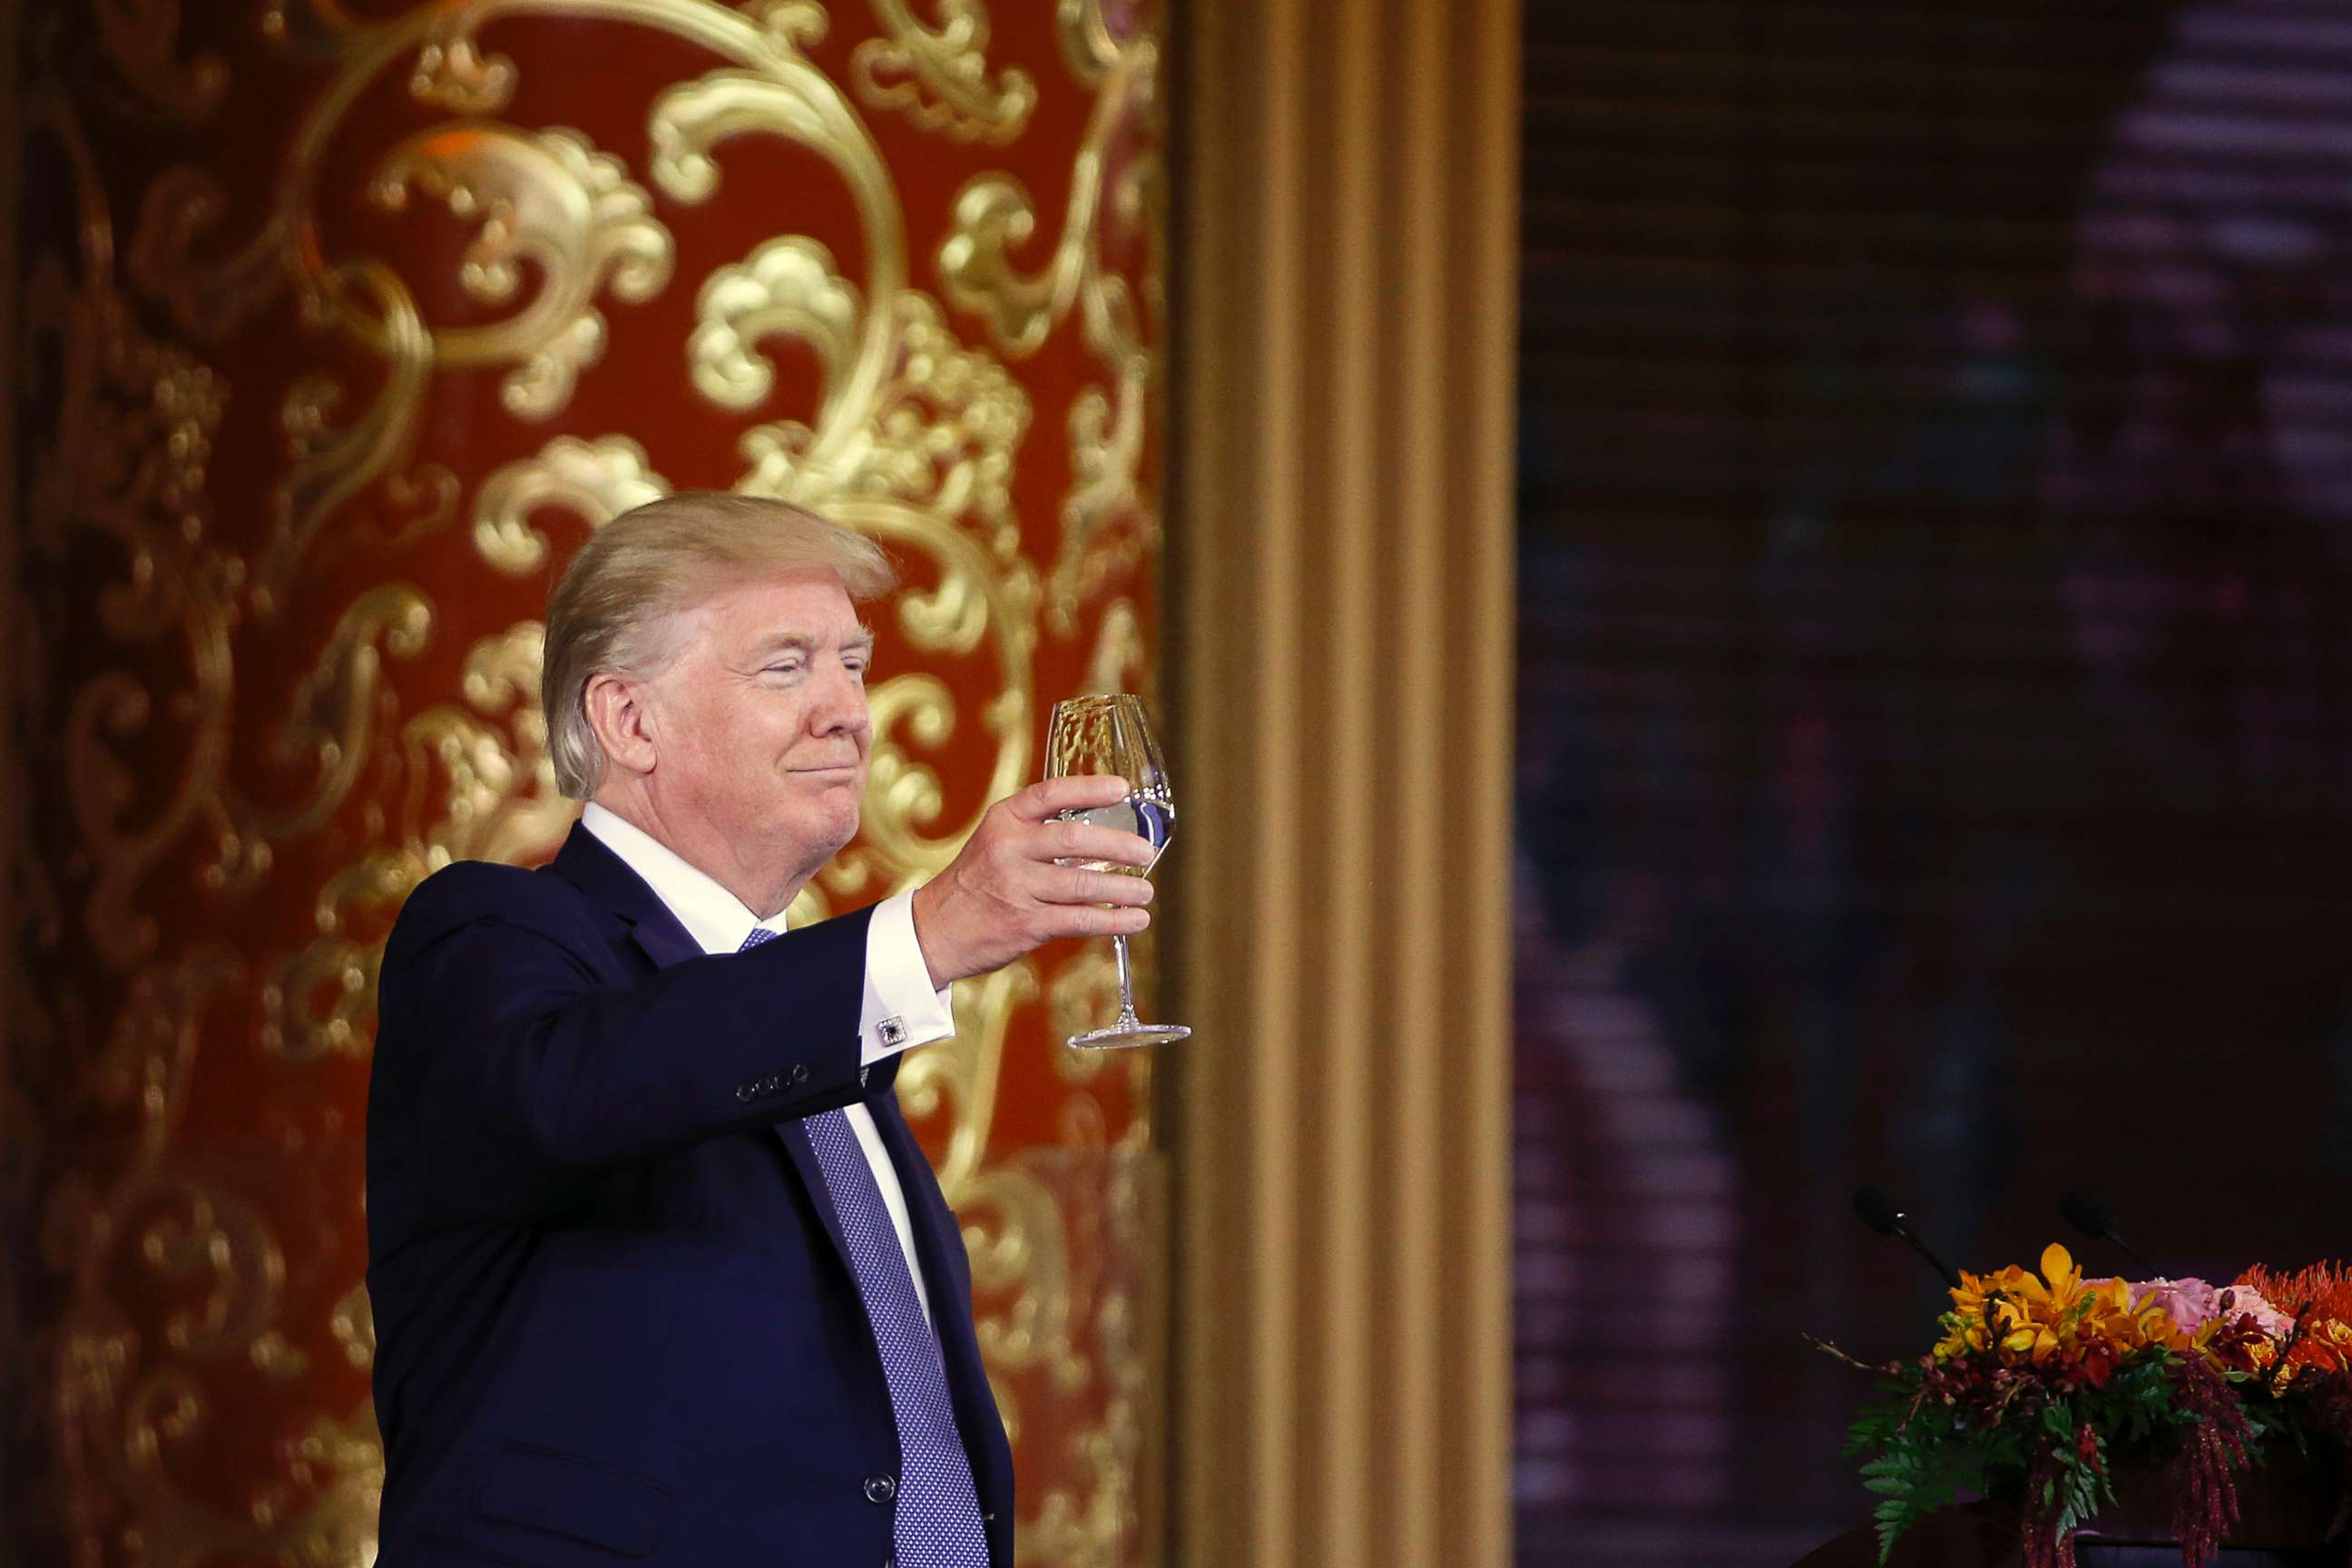 PHOTO: President Donald Trump toasts at a state dinner at the Great Hall of the People in Beijing, Nov. 9, 2017.